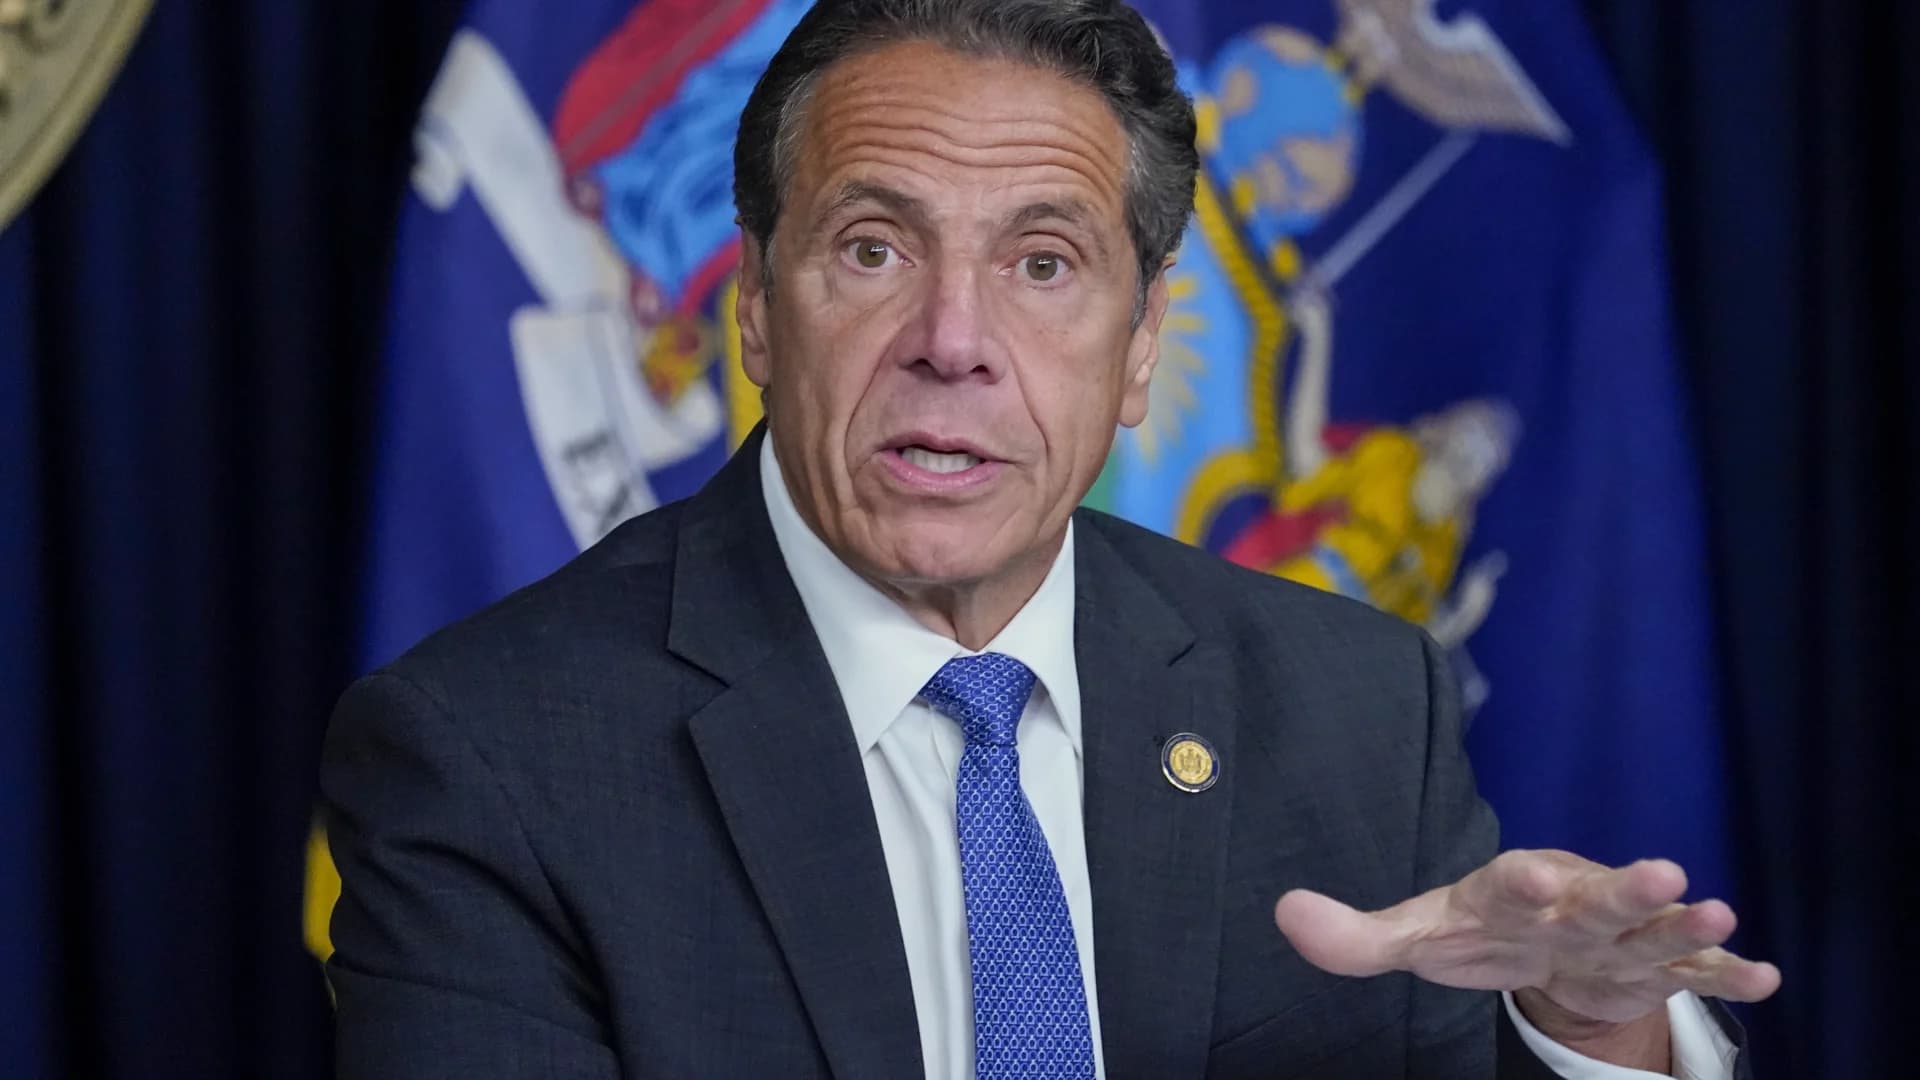 Poll: Majority of New Yorkers don't want to see Cuomo run for reelection